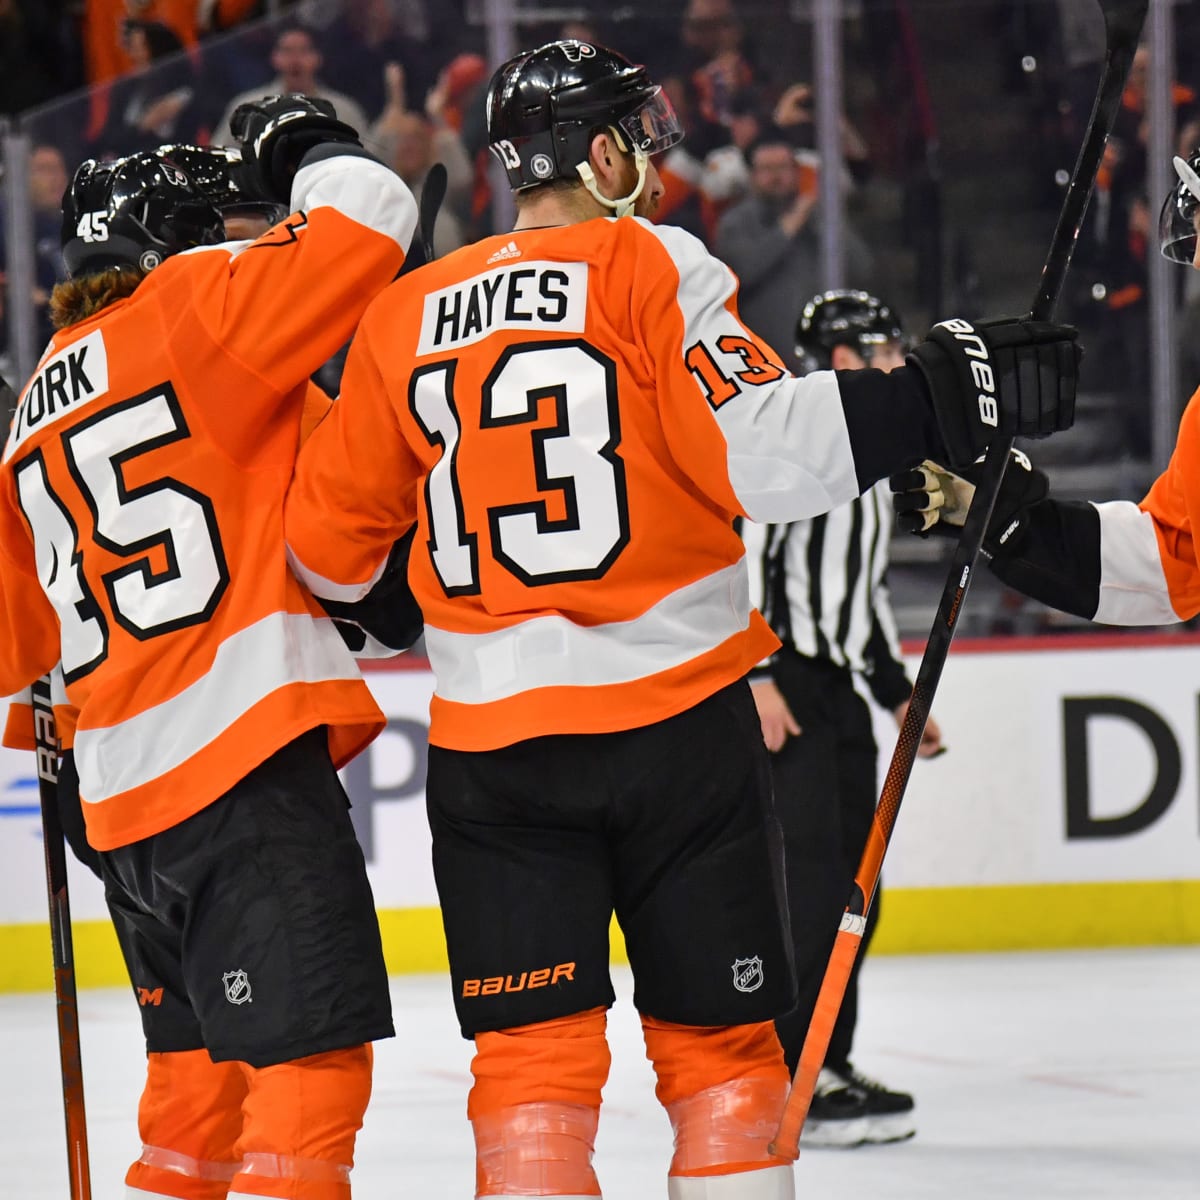 Return of Couturier, Atkinson should improve Flyers' outlook